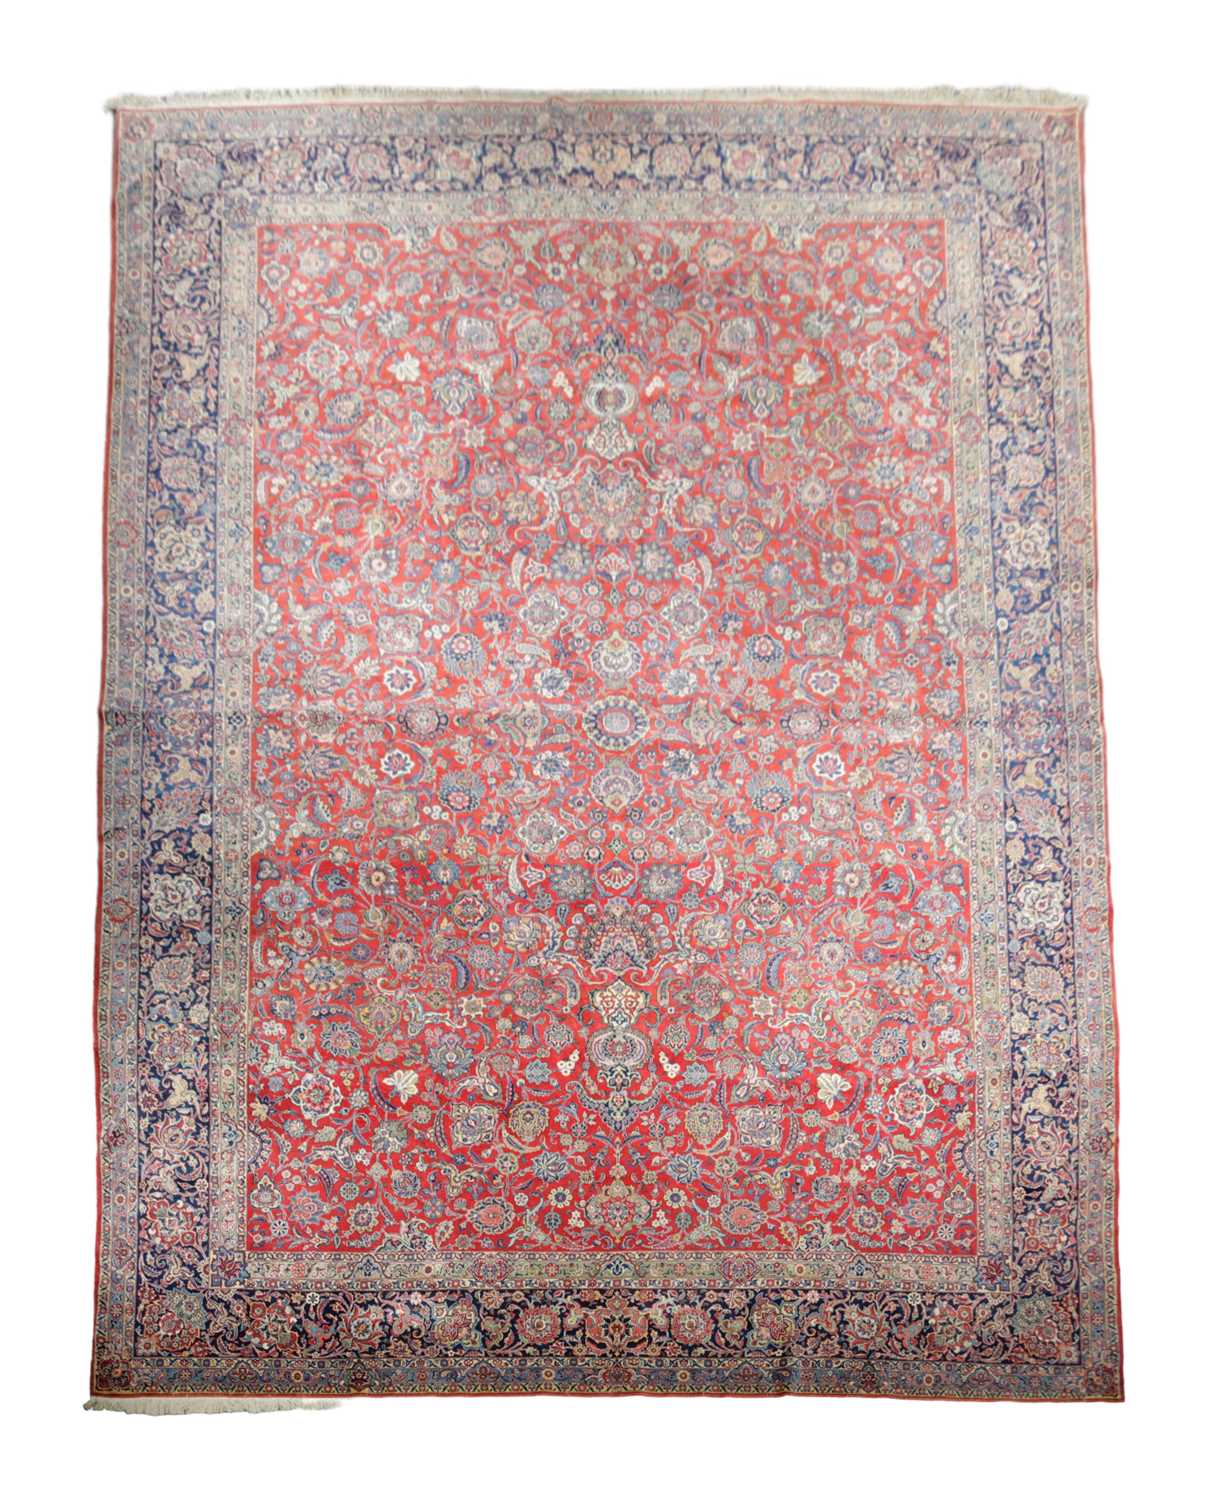 A GOOD KASHAN CARPET CENTRAL PERSIA, C.1940 the abrashed raspberry field with an all over design